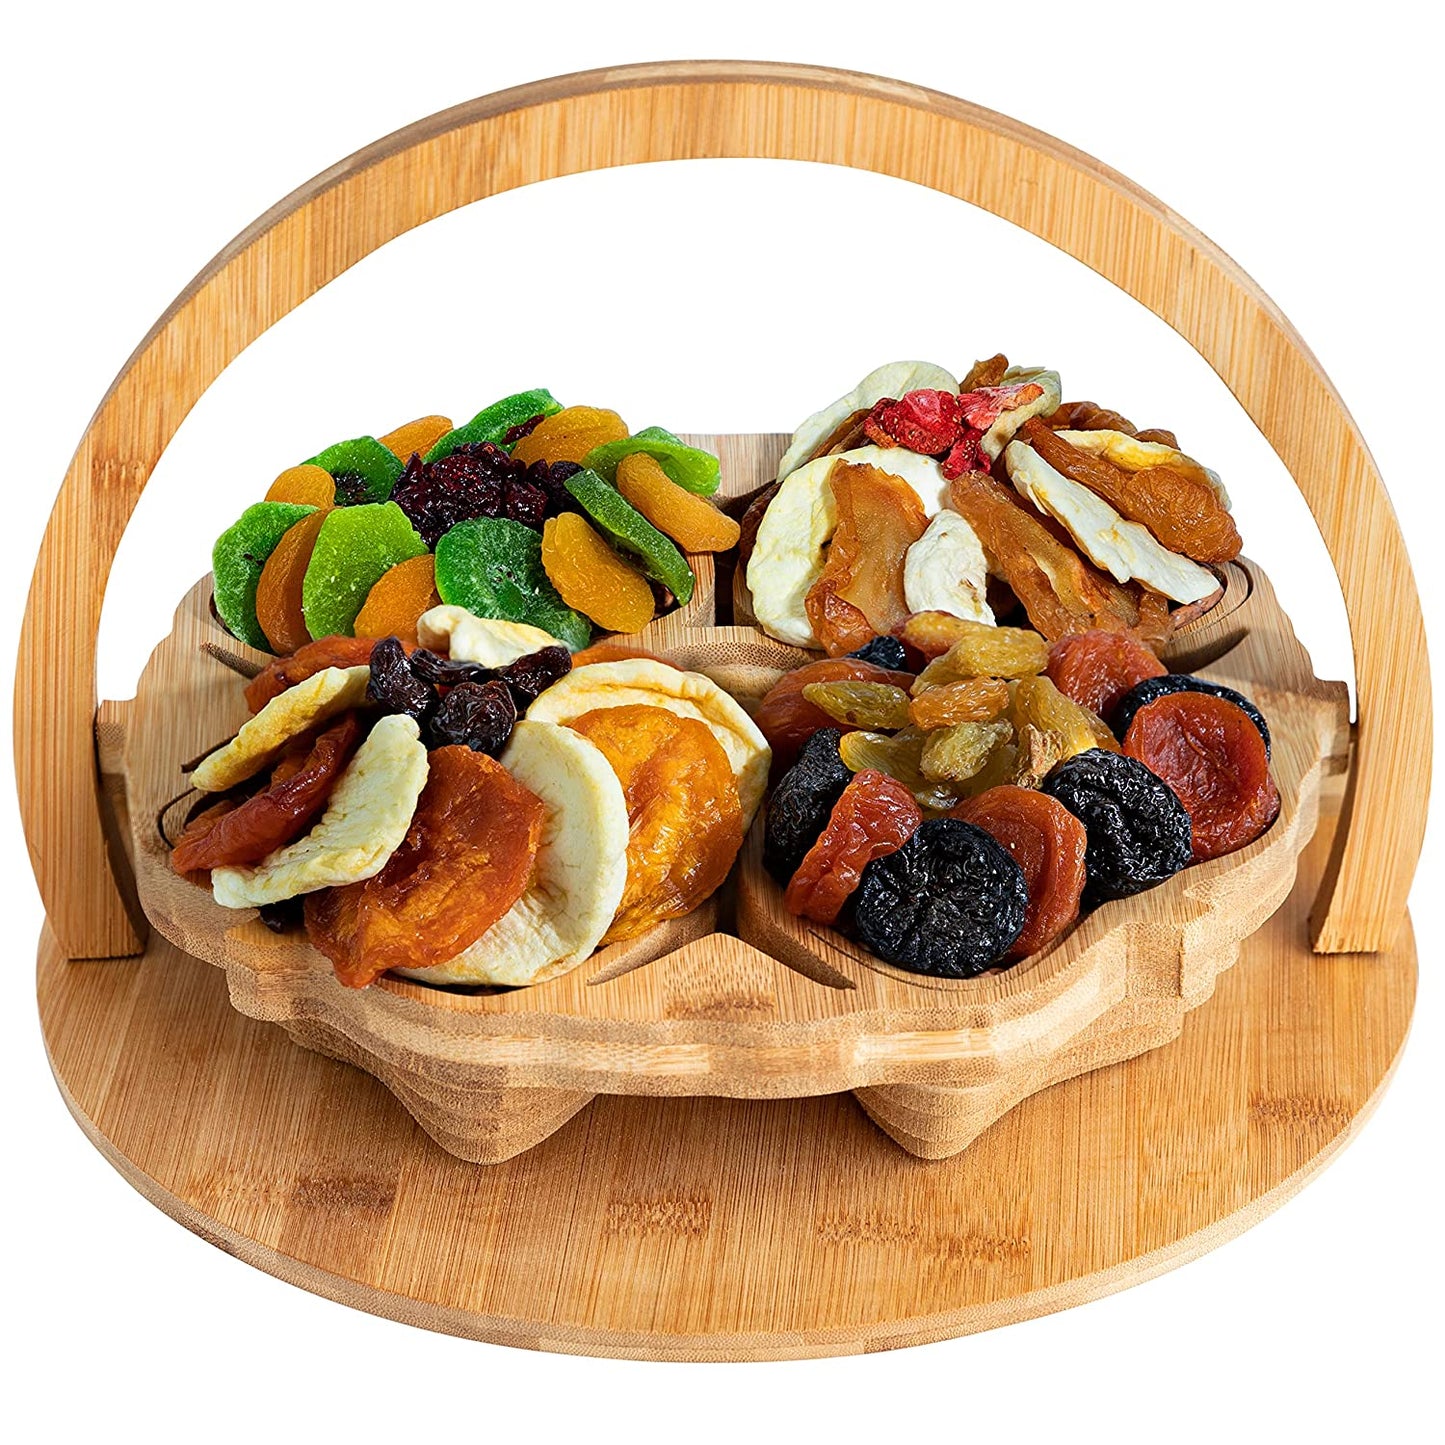 New Dried Fruit Fathers Day Gift Baskets, Prime Gifts Ideas For Dad, Gourmet Vegan Food Basket, Assortment Box Delivery Husband Grandpa Stepdad Him Men From Daughter Wife Son Kids Girlfriend